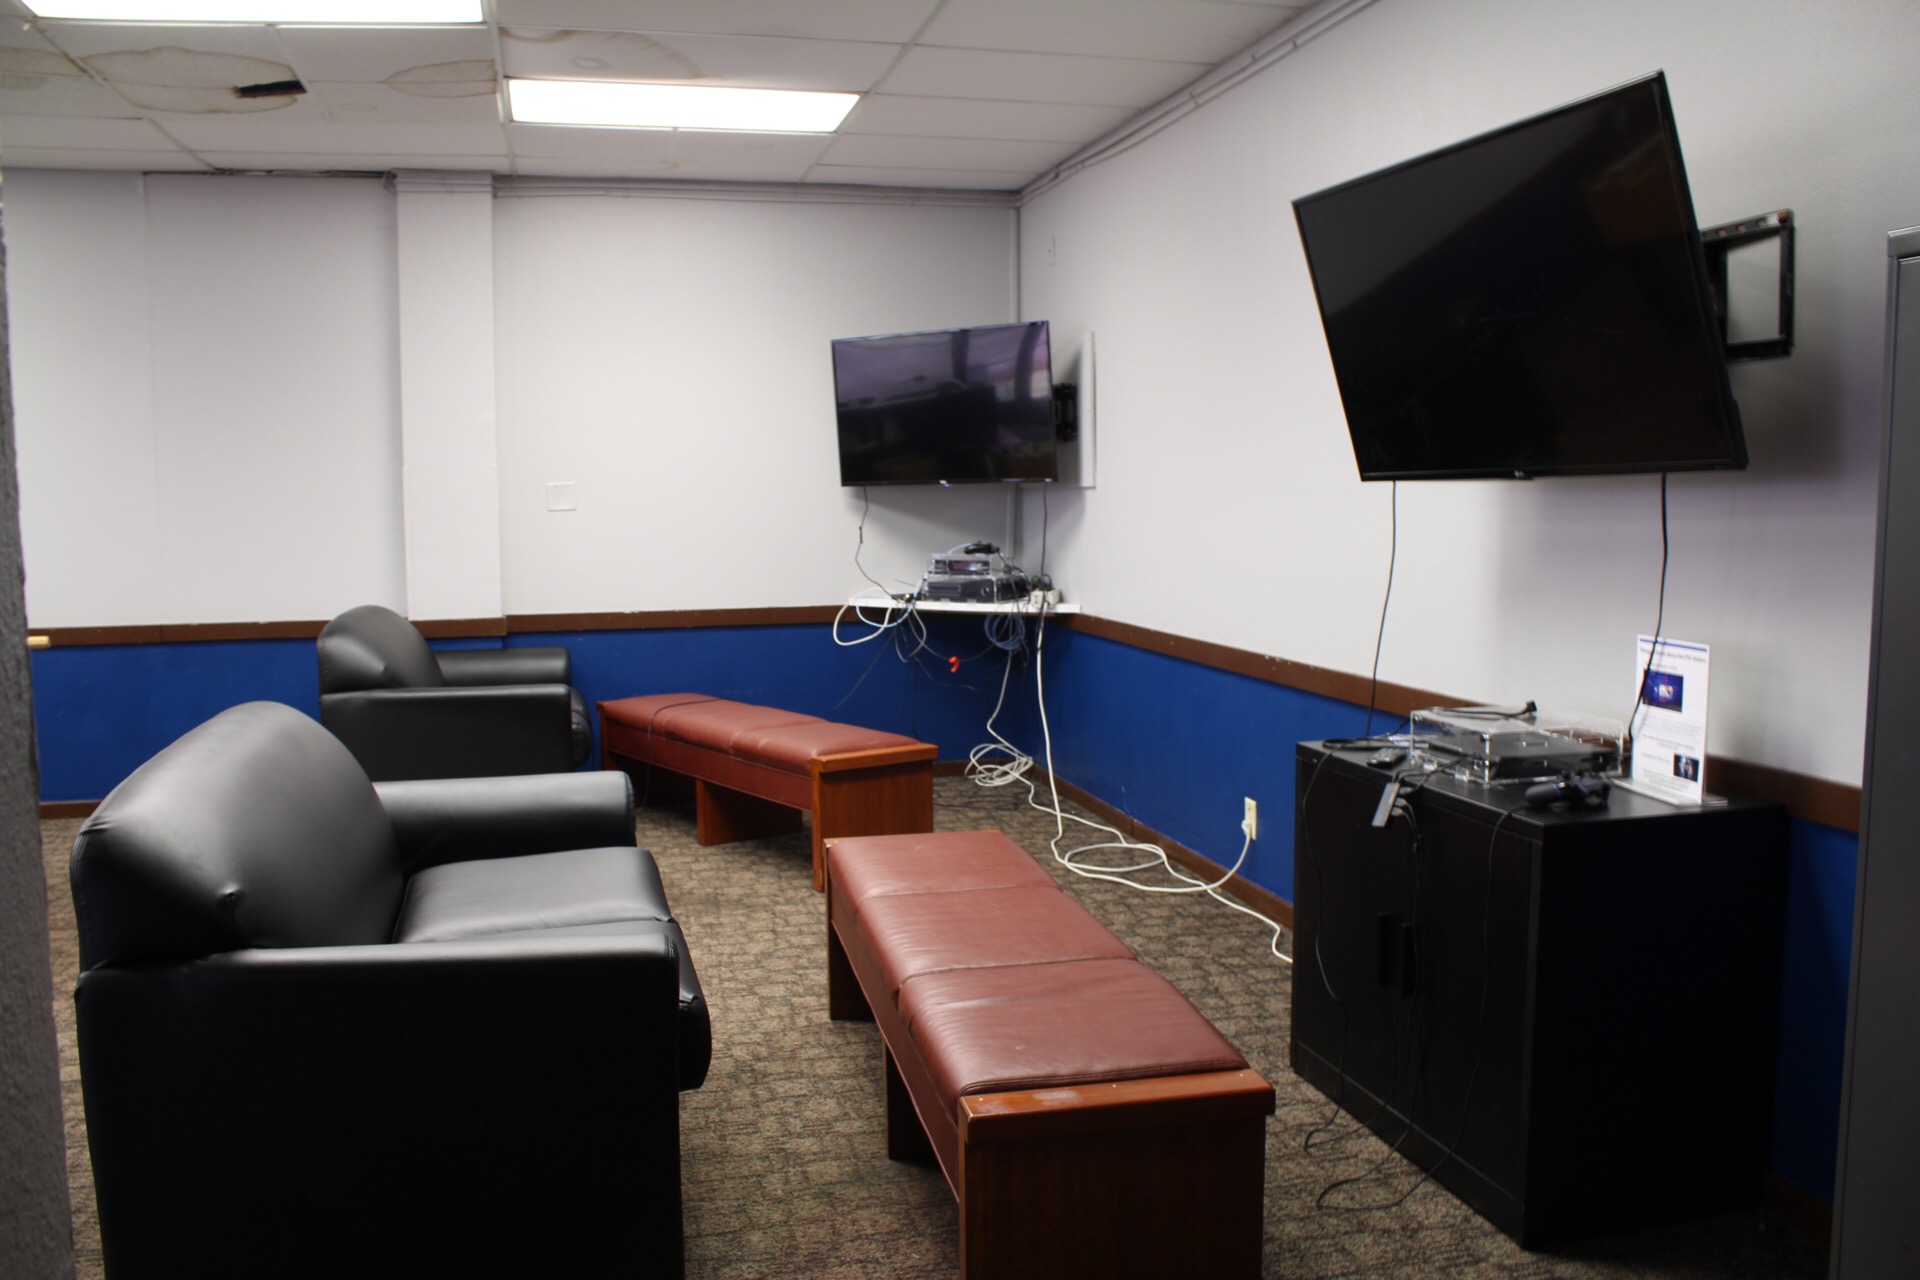 Game Room showing an additional wall mounted tv, consoles and couches for video games.